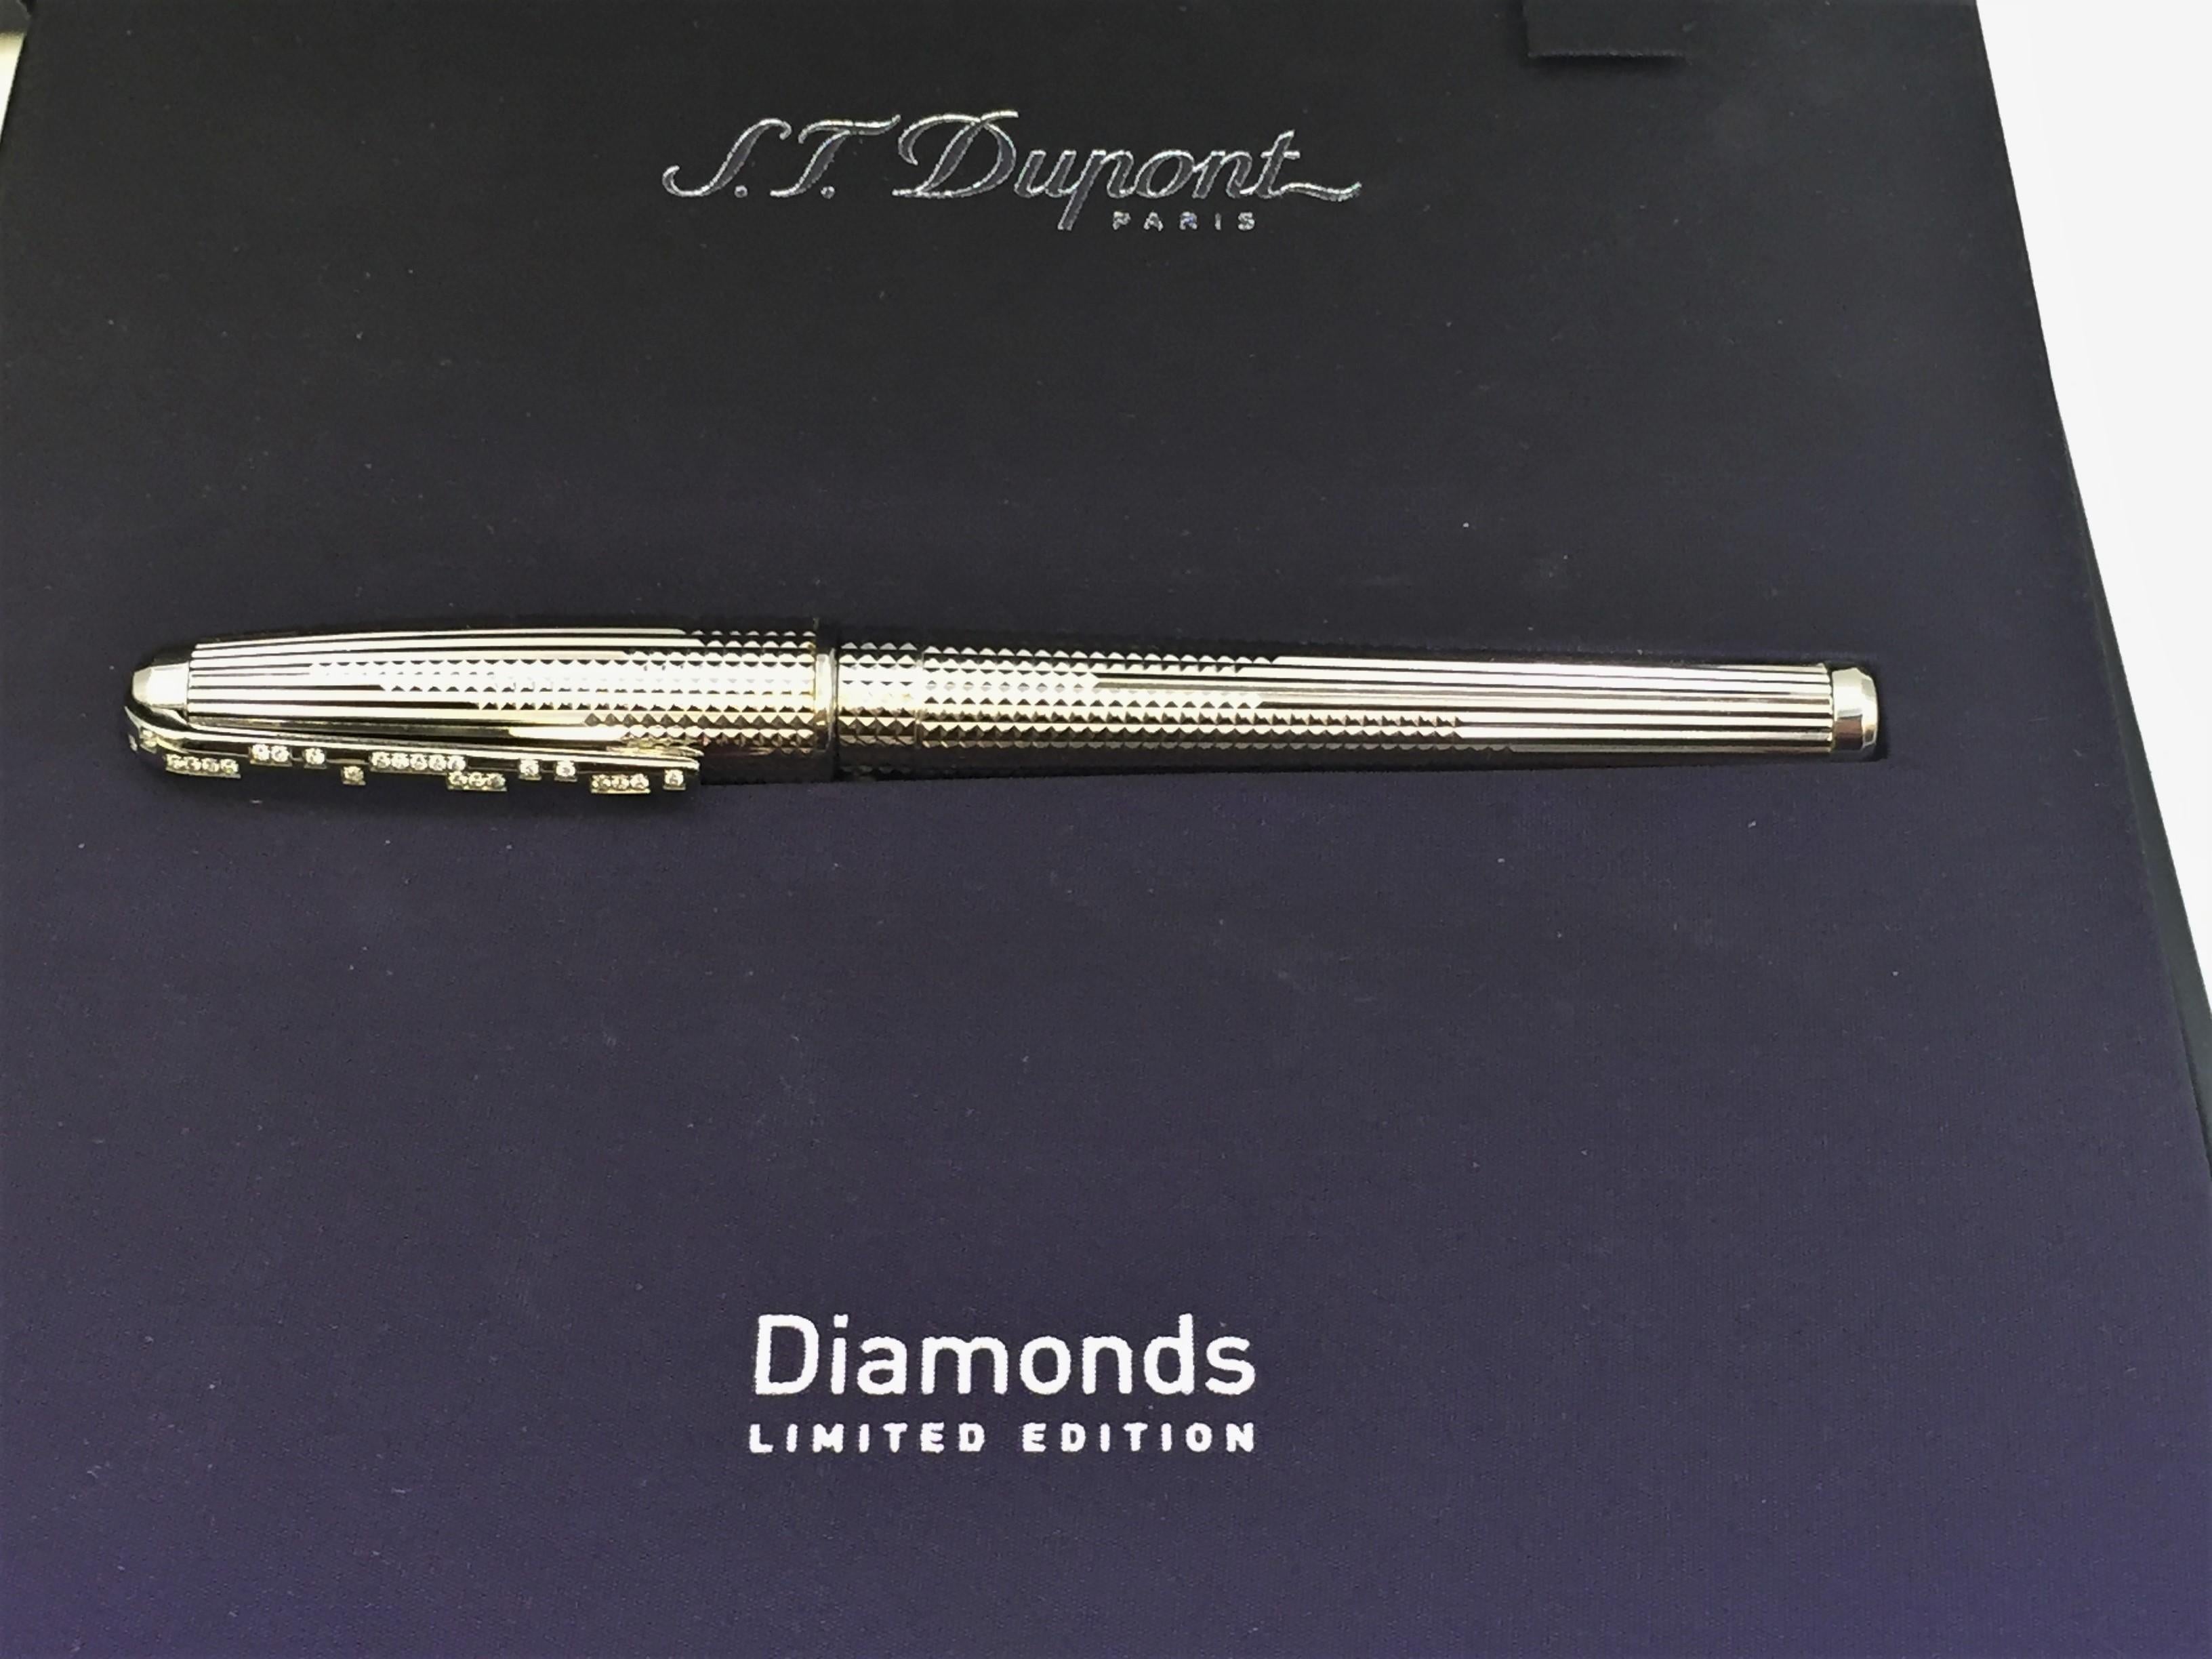 20th Century S.T. Dupont Olympio Limited Edition Fountain Pen with Diamonds For Sale